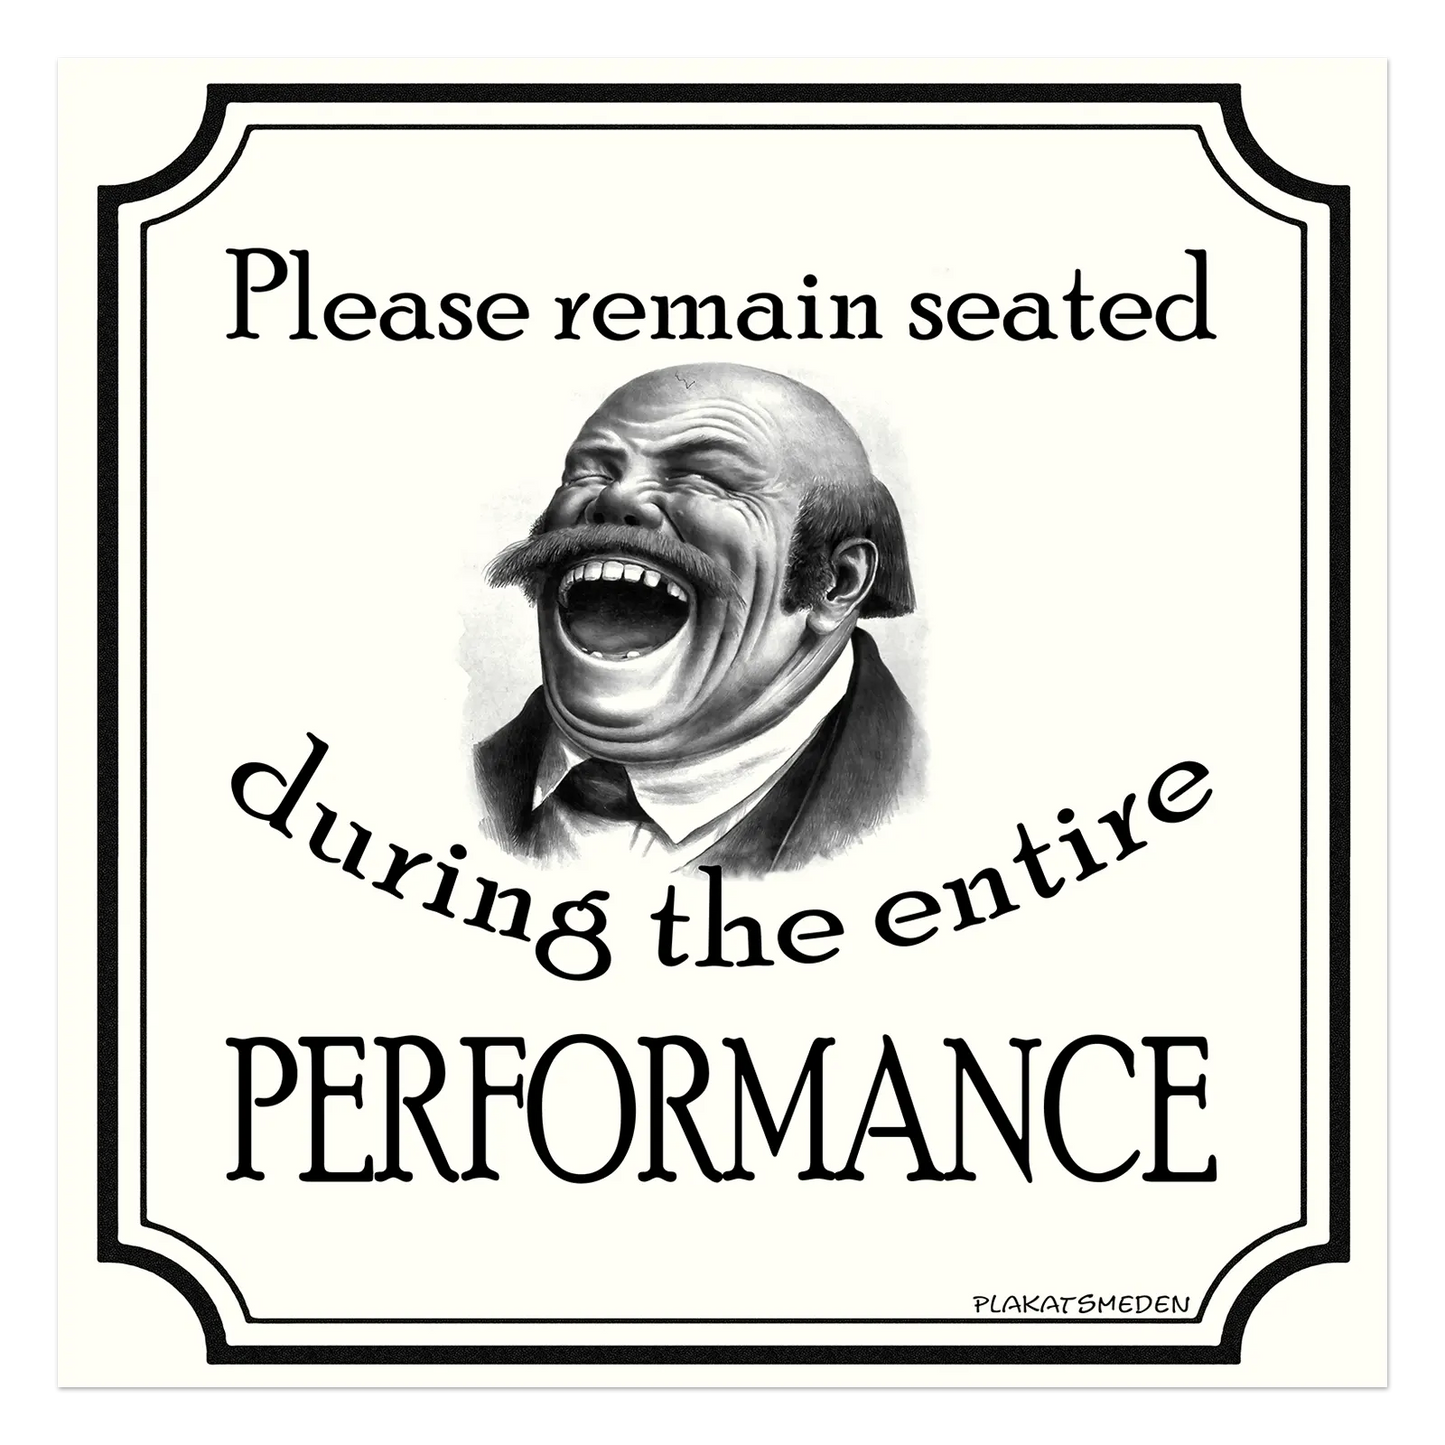 Please remain seated during the entire performance